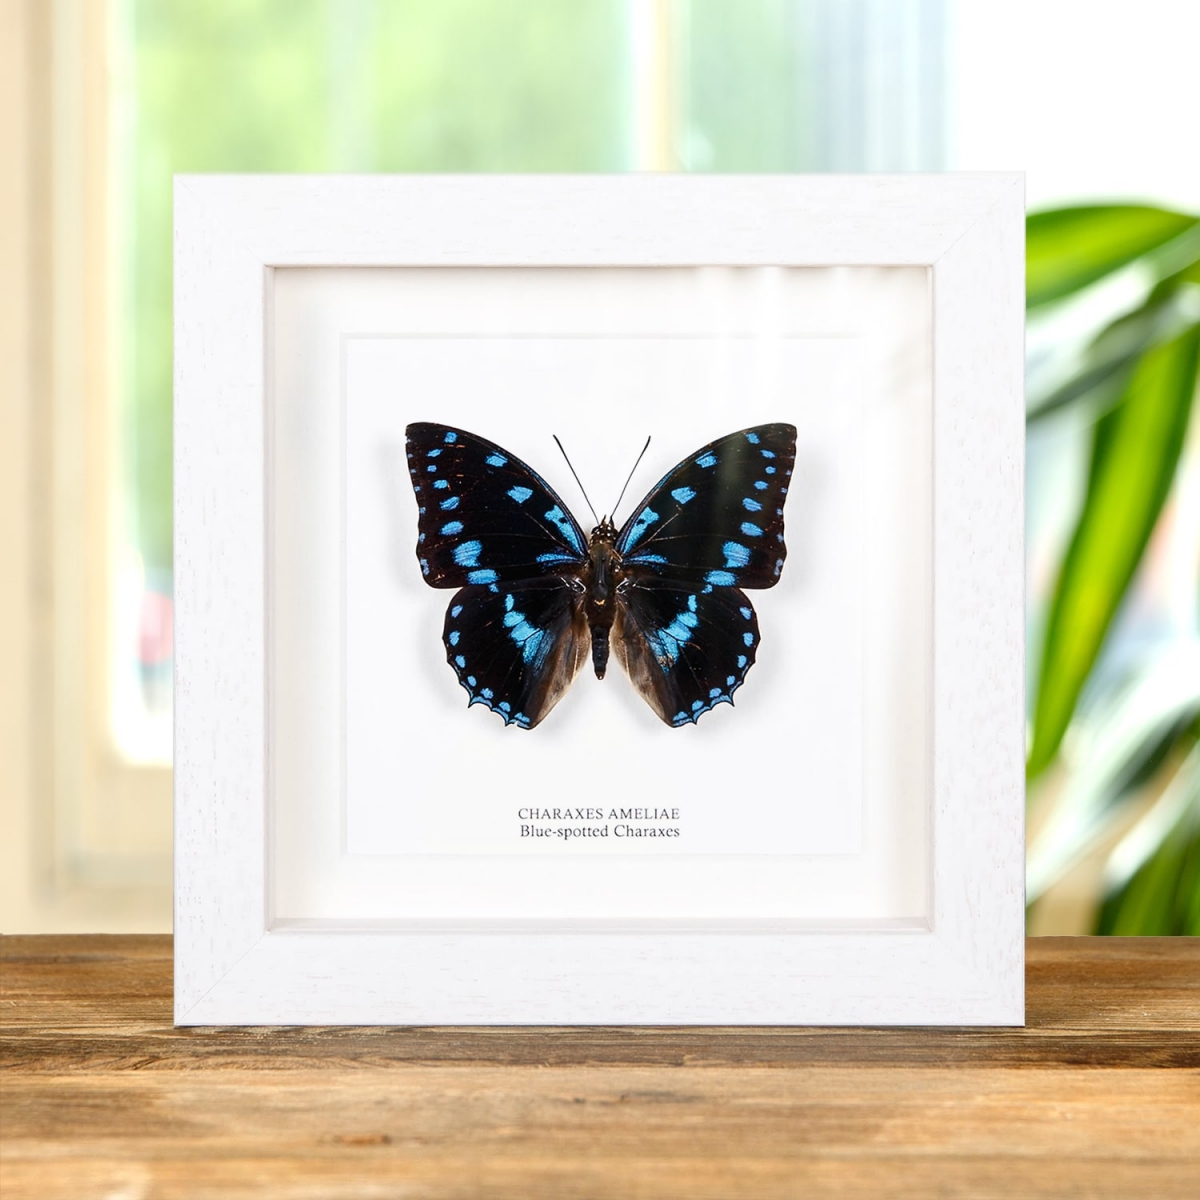 Blue-Spotted Charaxes in Box Frame (Charaxes ameliae)